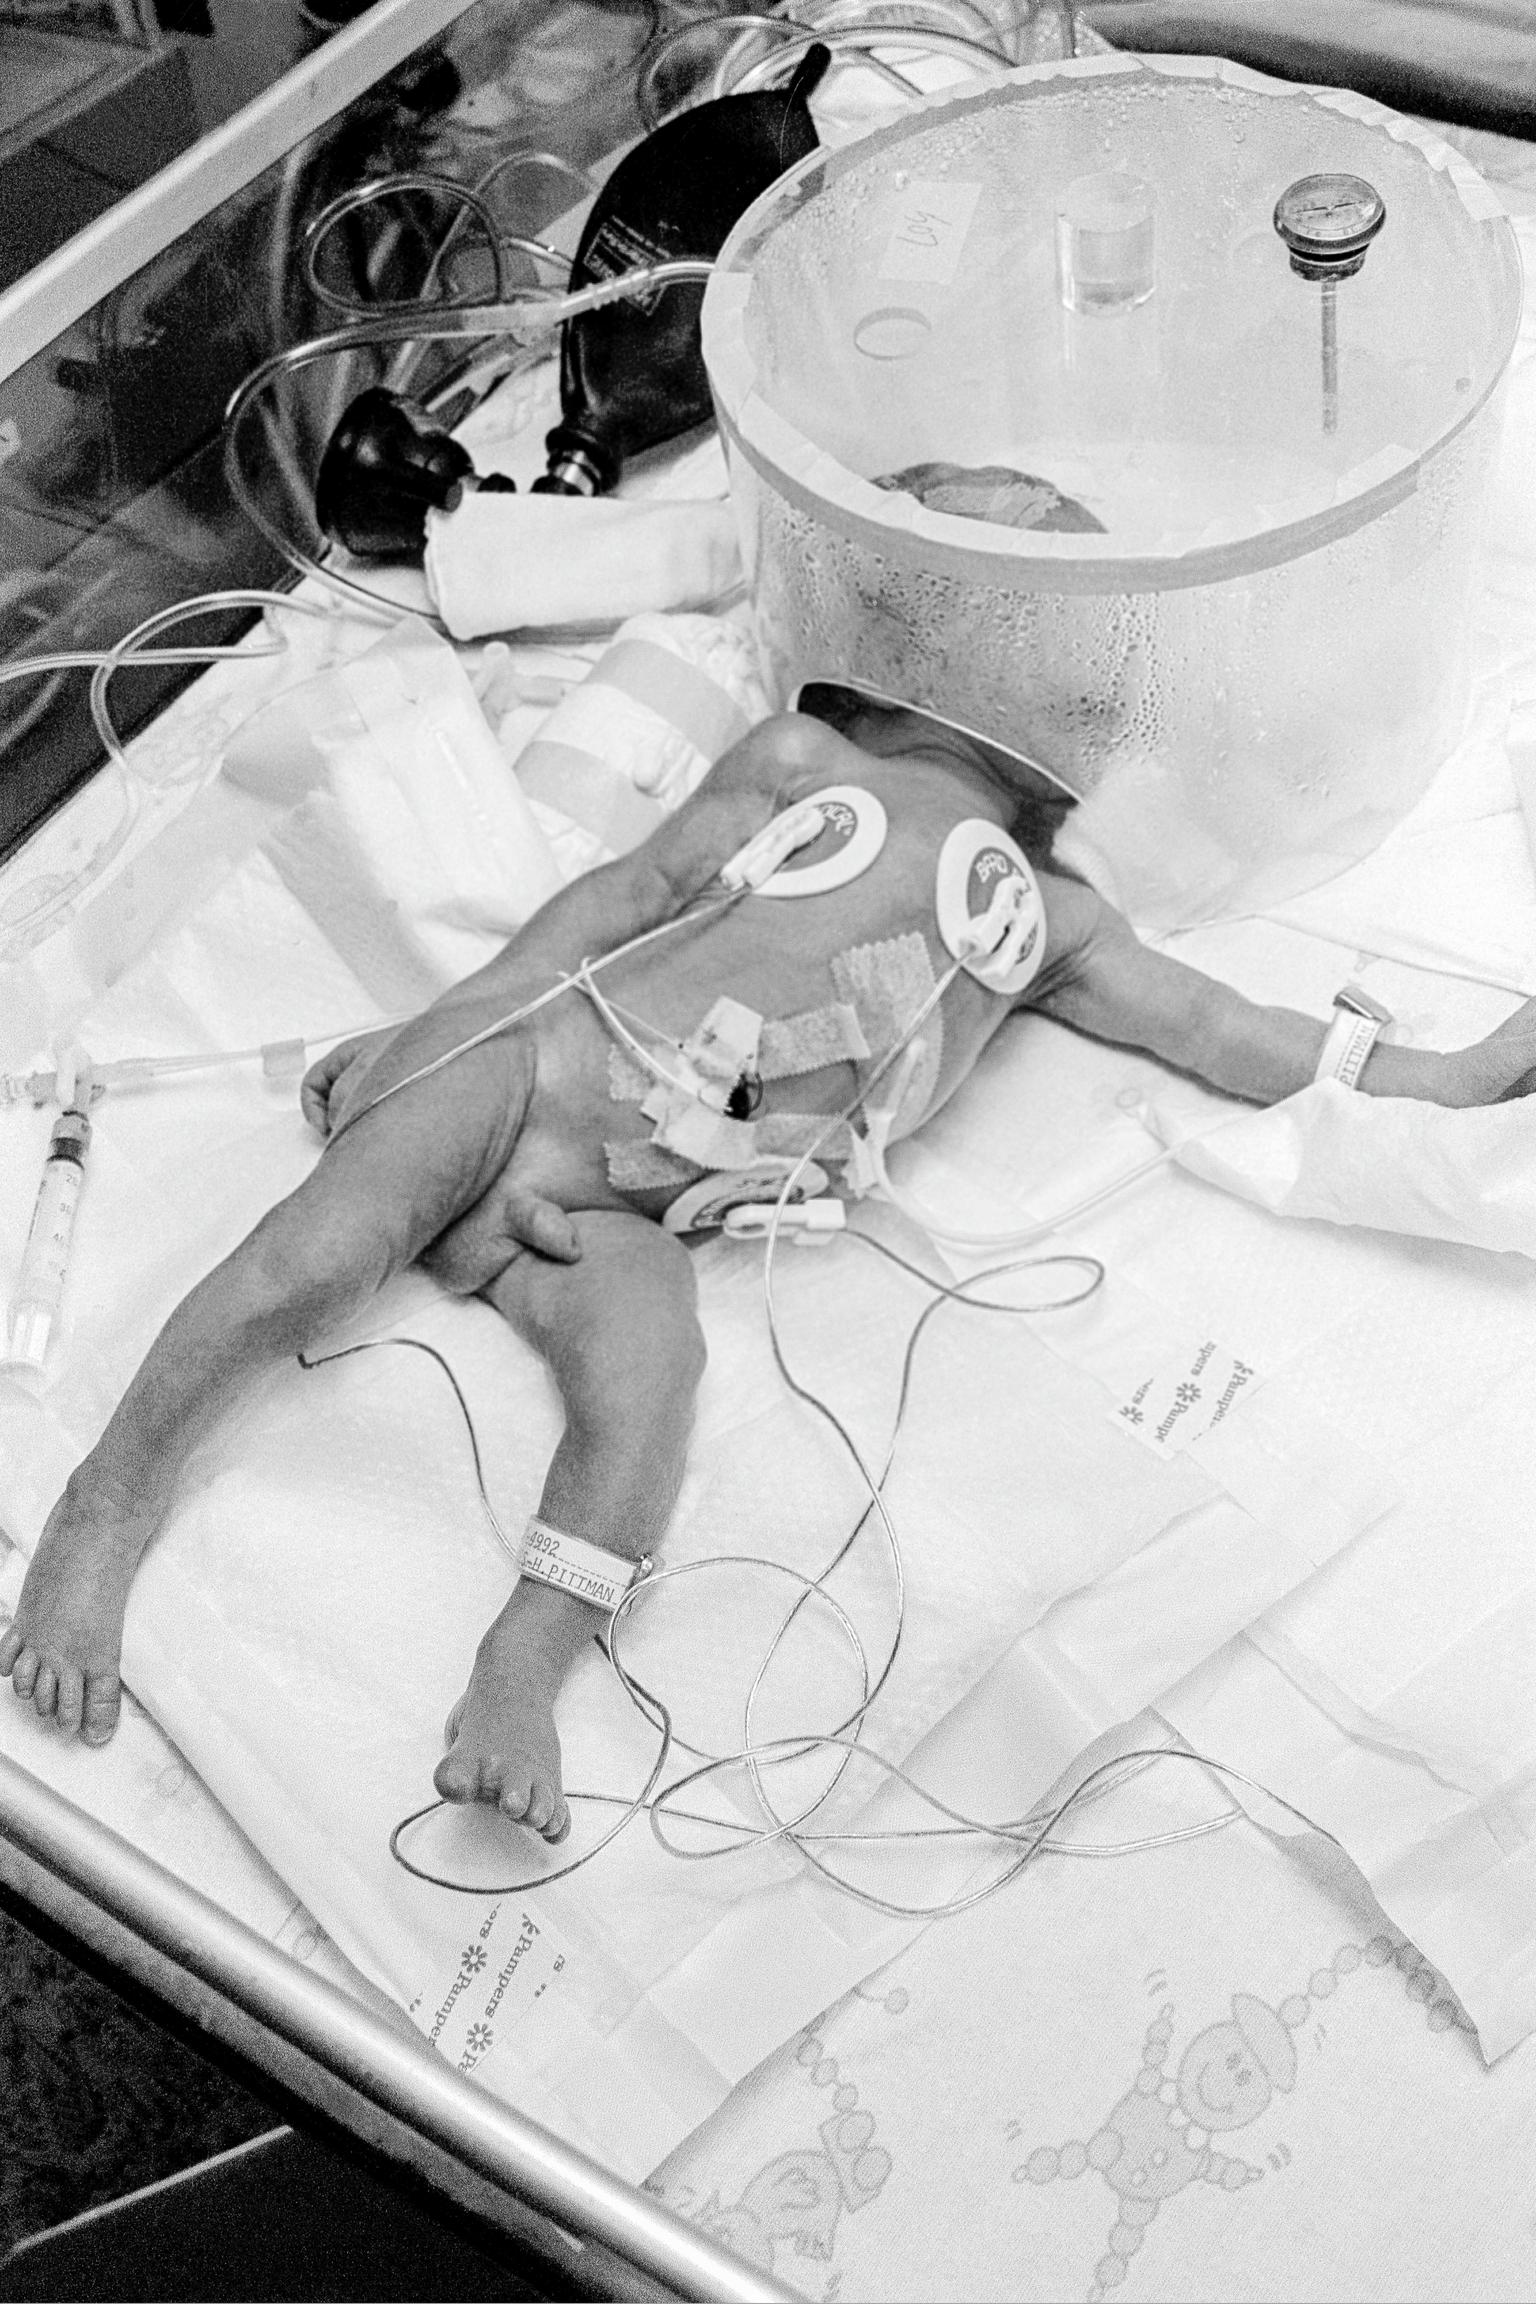 Preemie Baby unit at St Joseph's Hospital. Preemie baby in I.C.U. showing electrode, umbilical catheter, temperature probe and a hood of oxygen at 50% also humidified to reduce irritation. Phoenix, Arizona USA